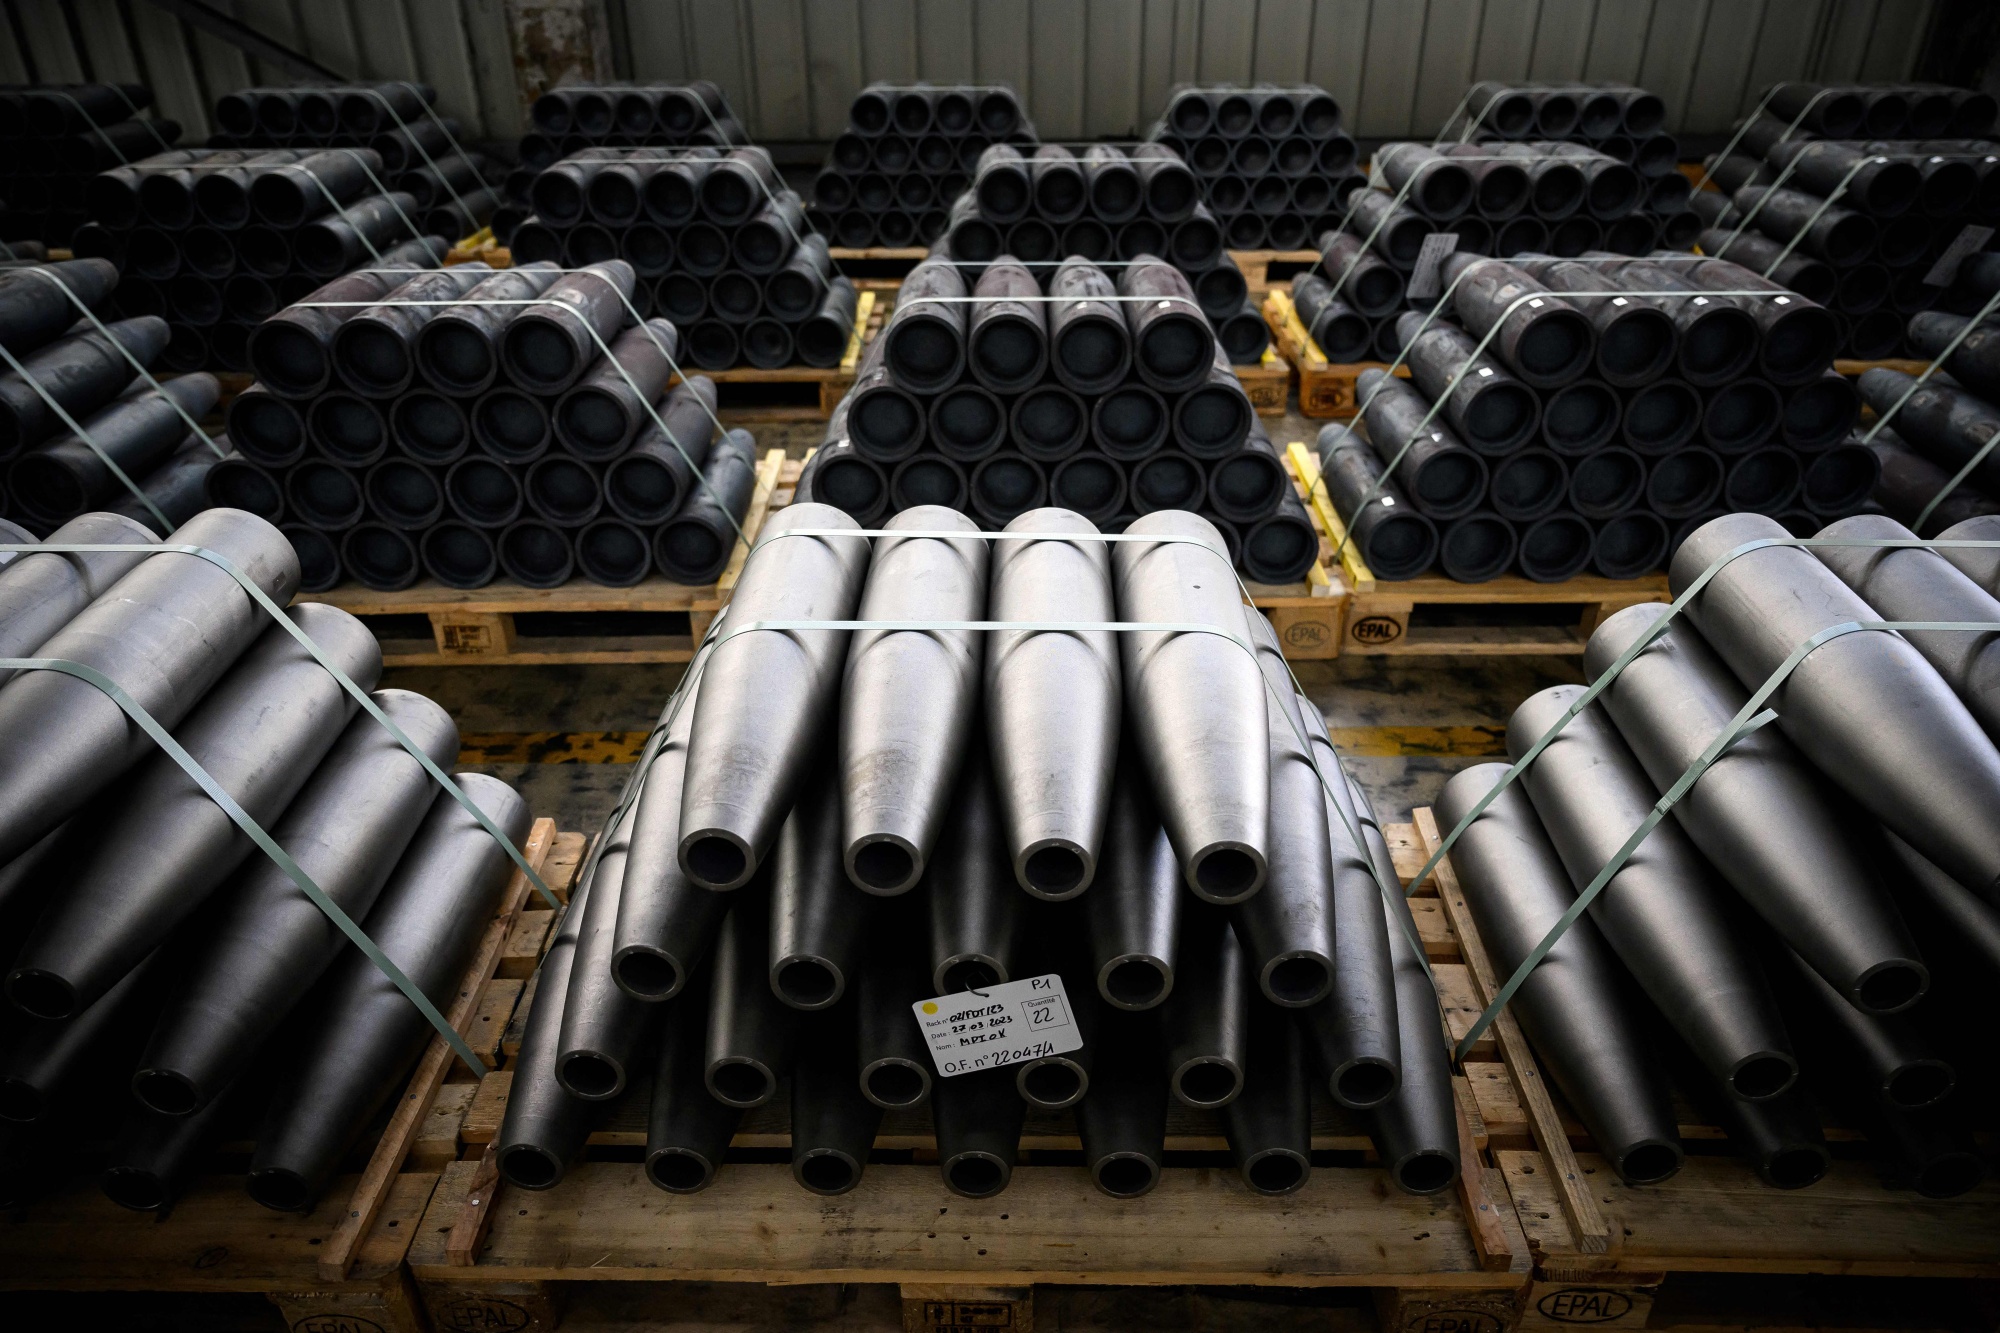 EU Set to Double Output of Artillery Shells After Slow Start - Bloomberg